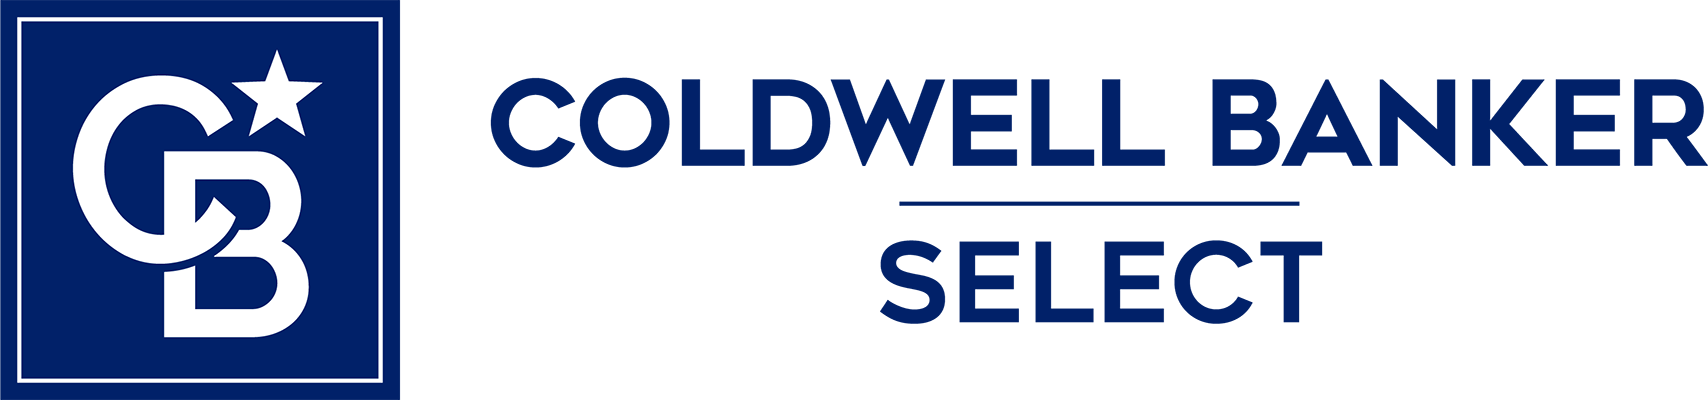 Andrea Chenoweth - Coldwell Banker Select Logo